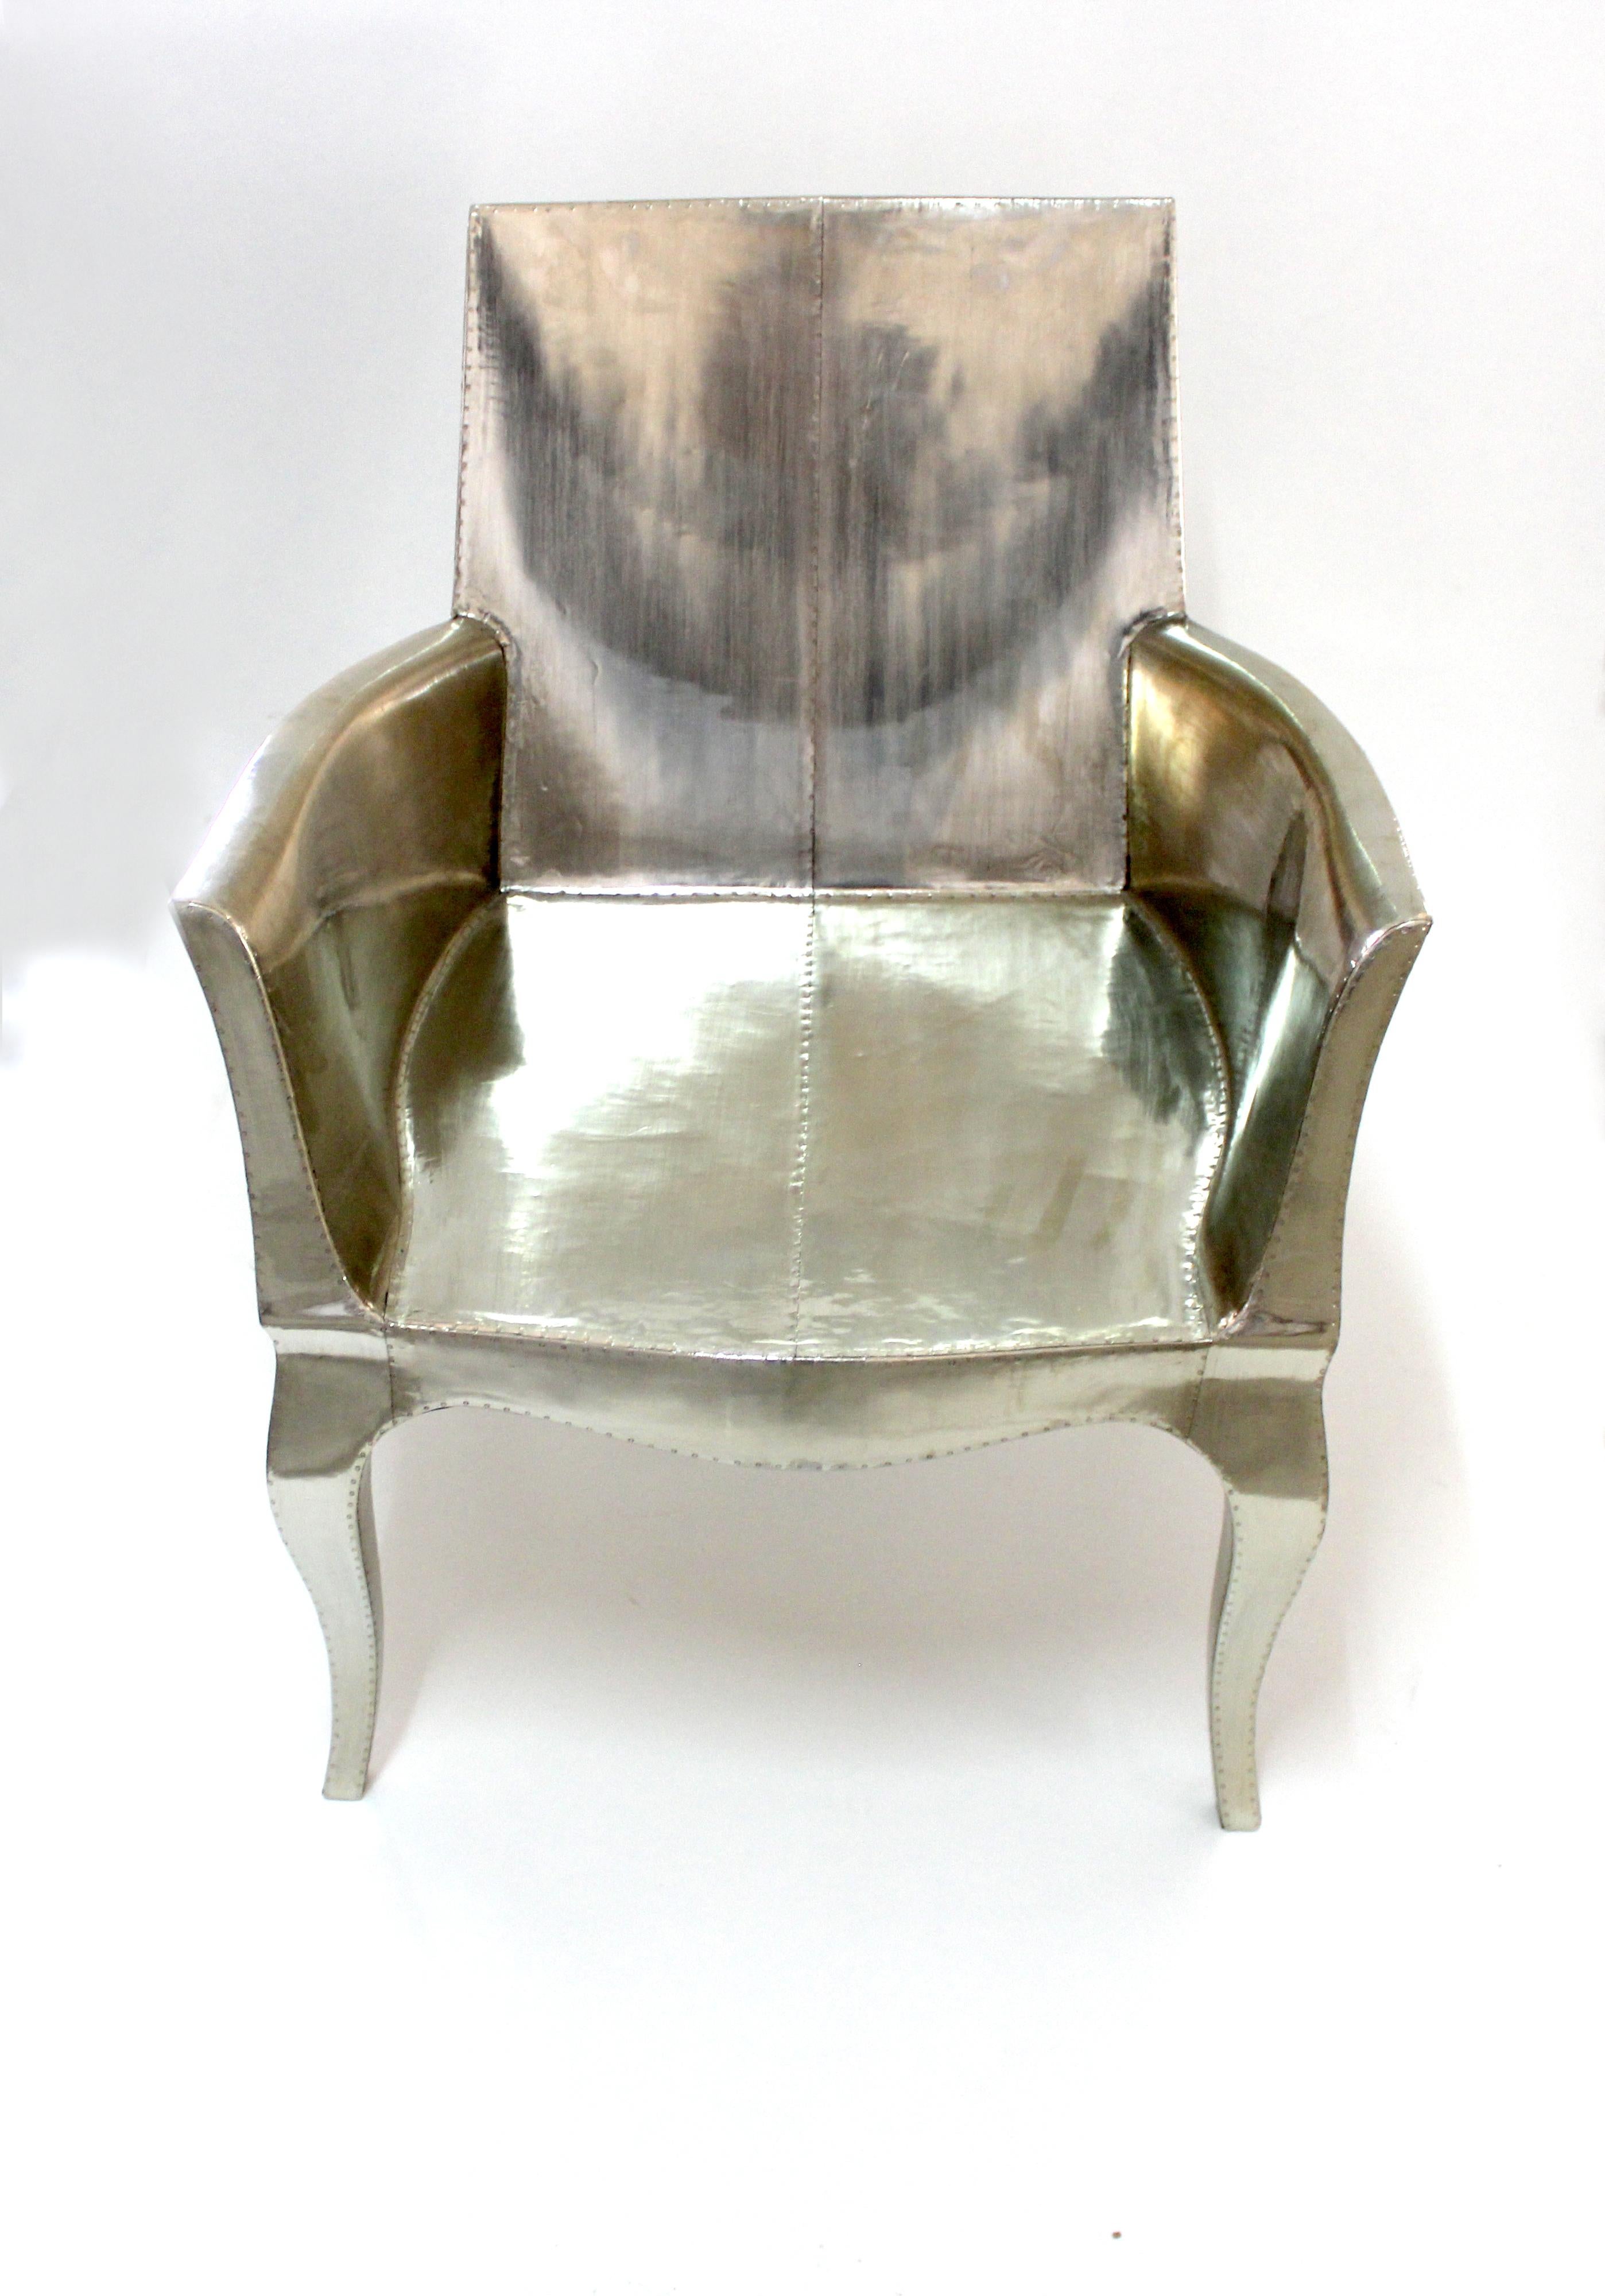 Art Deco Desk Chair in Smooth Antique Bronze by Paul Mathieu for S. Odegard For Sale 7